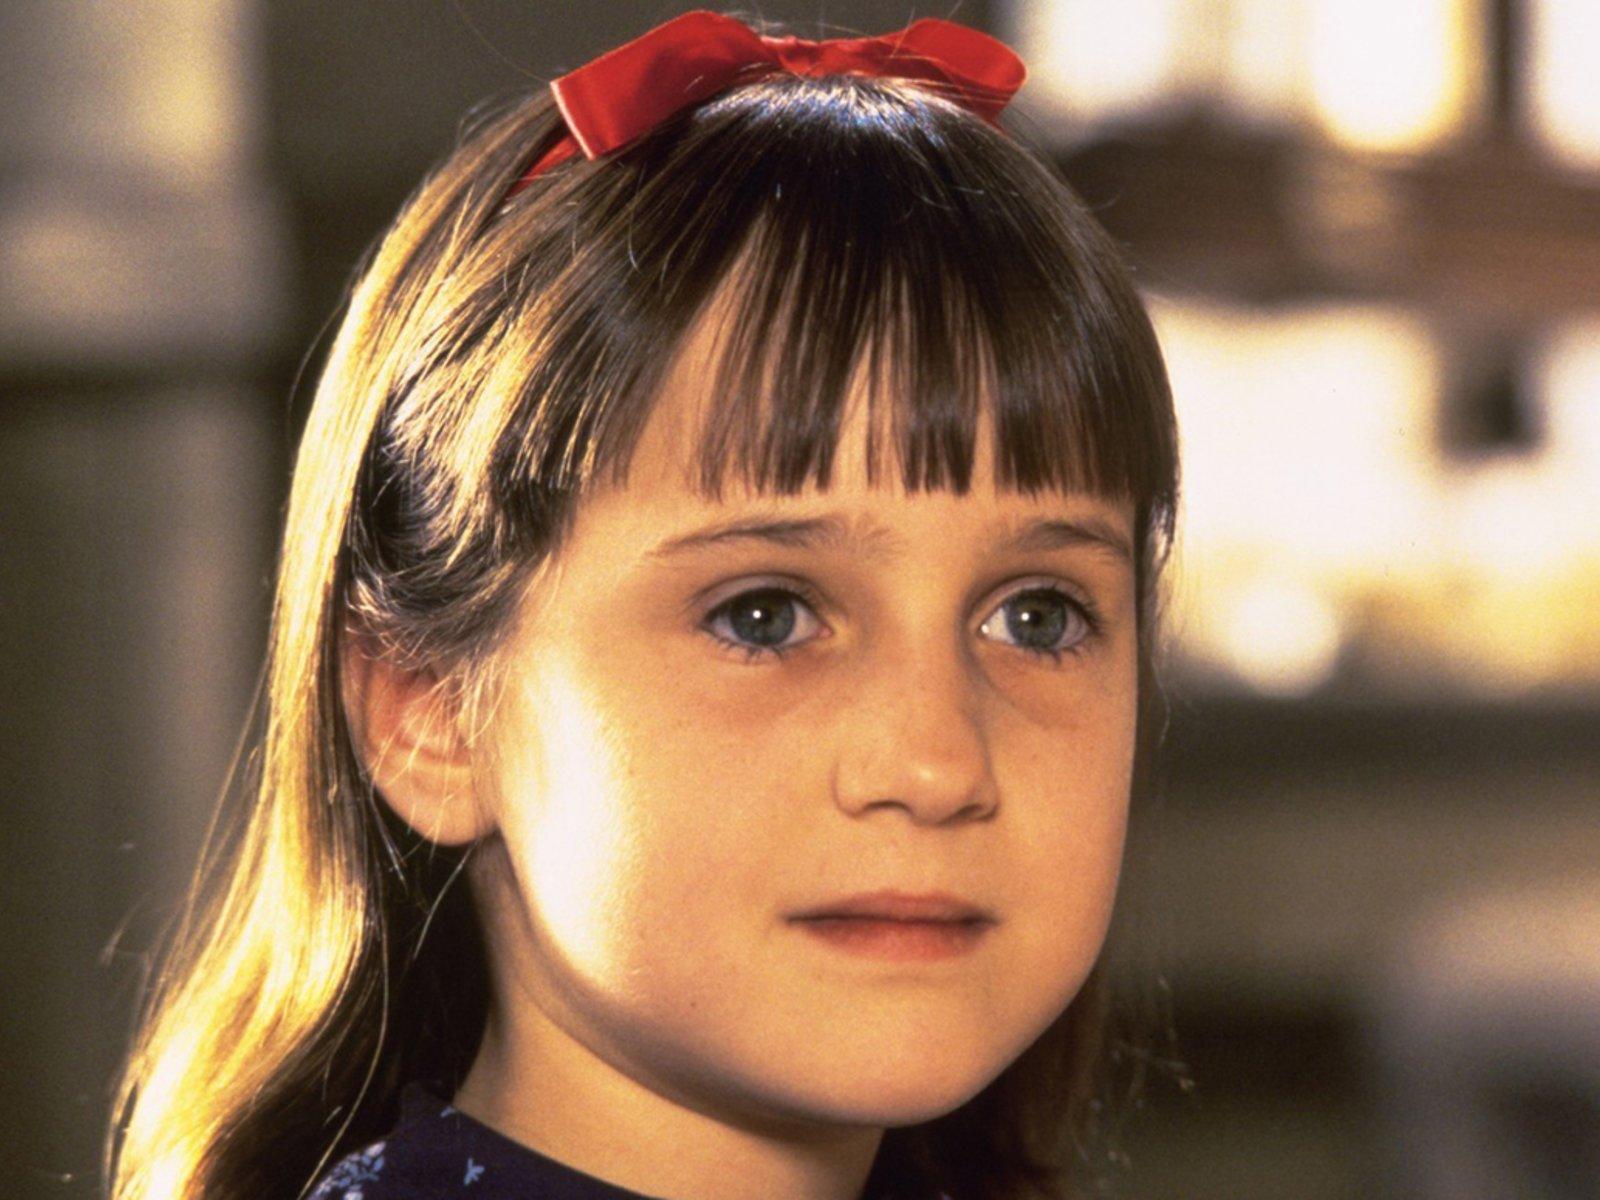 Mara Wilson played the title role in the 1996 movie version of Dahl’s classic